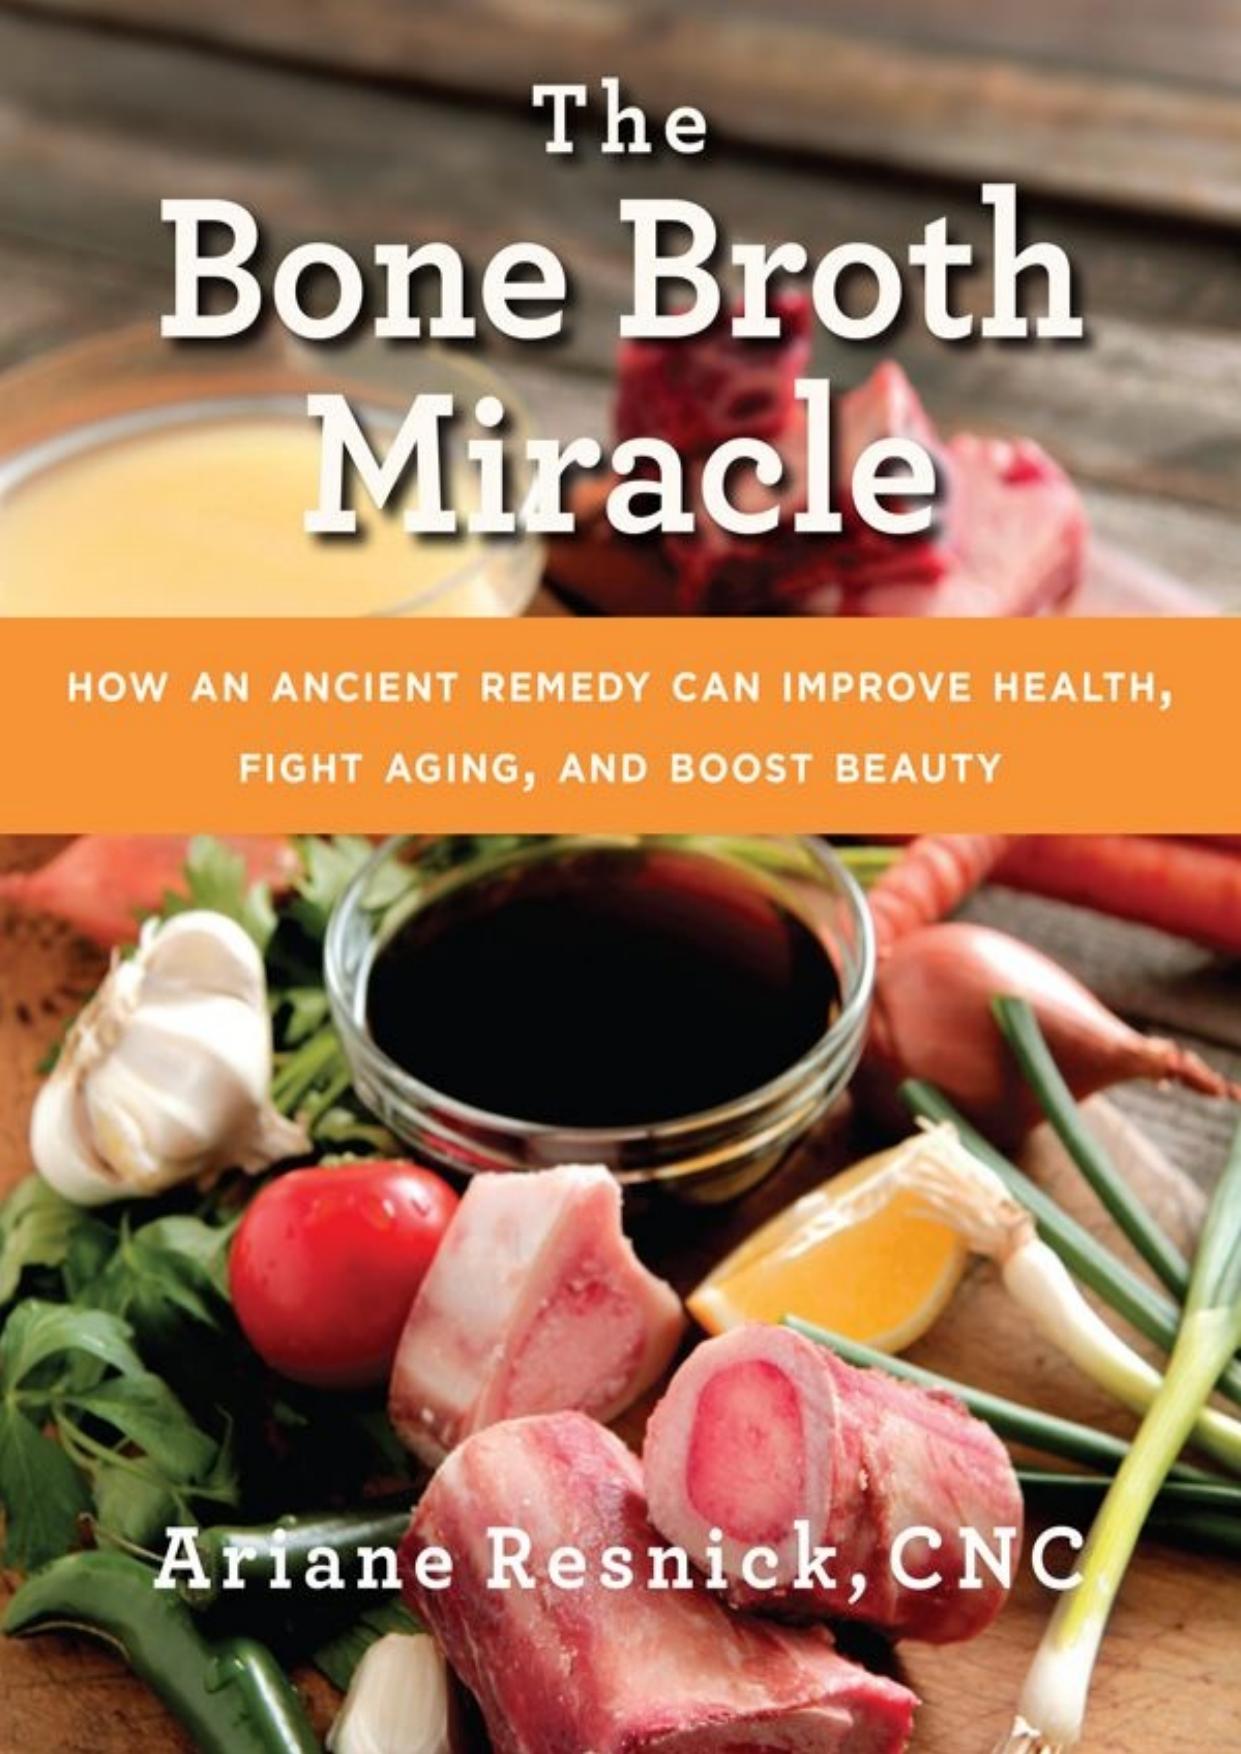 The Bone Broth Miracle: How an Ancient Remedy Can Improve Health, Fight Aging, and Boost Beauty by Ariane Resnick